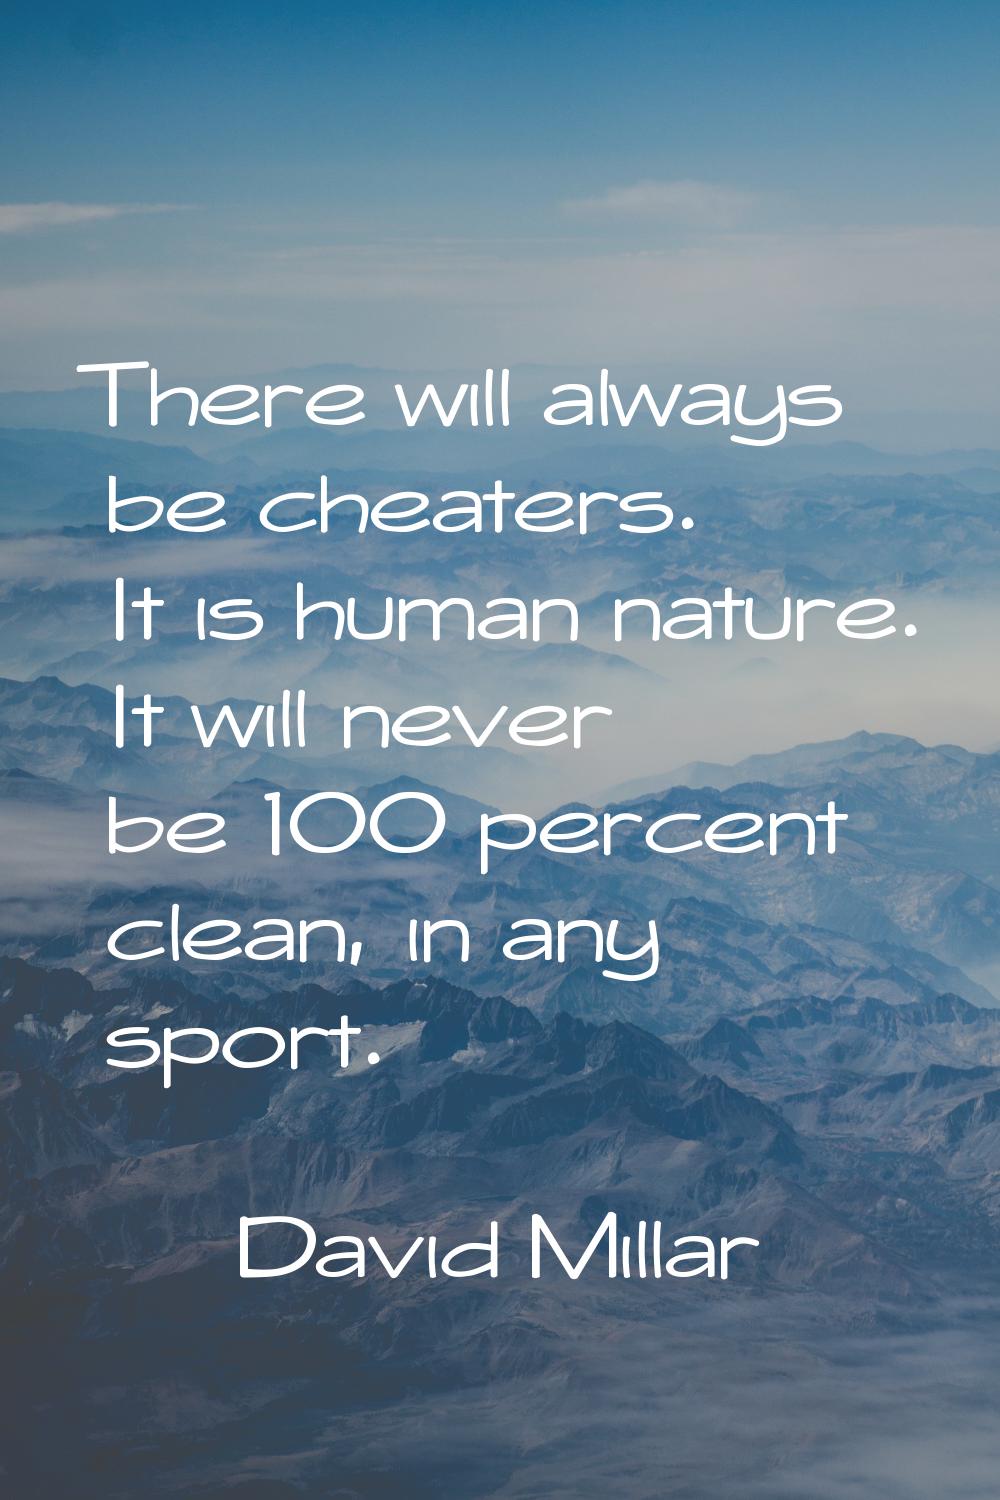 There will always be cheaters. It is human nature. It will never be 100 percent clean, in any sport